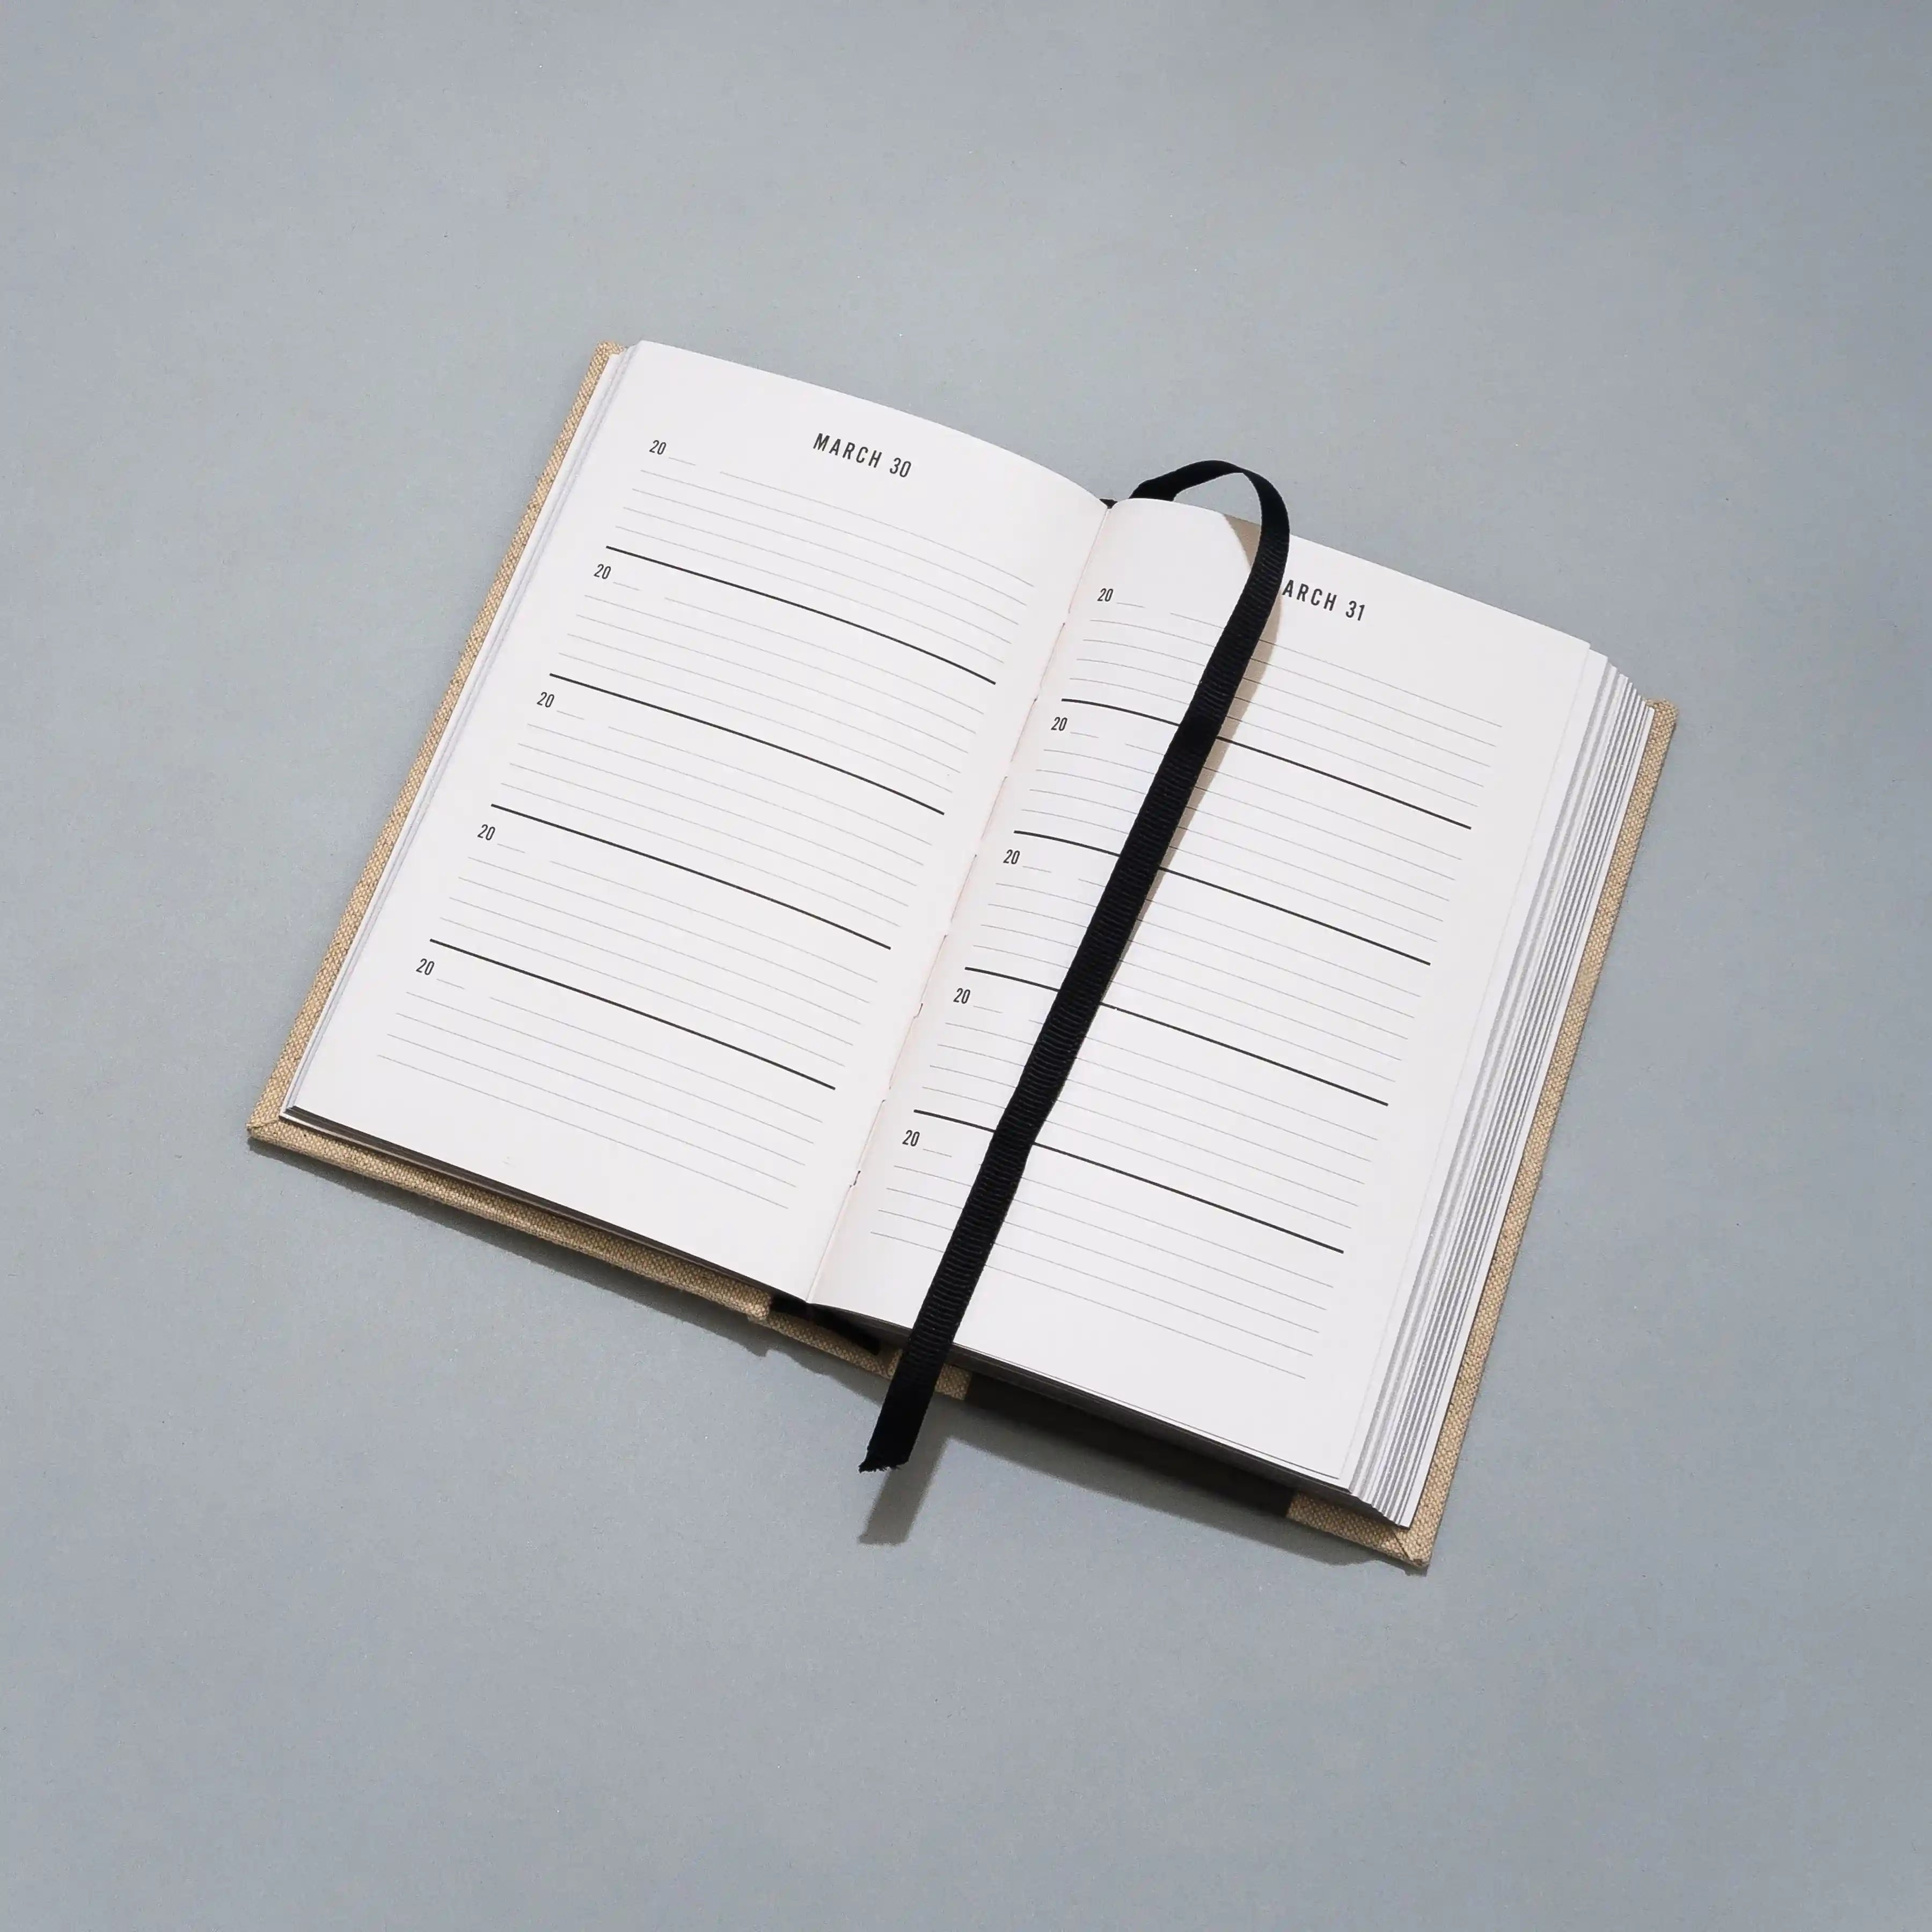 One Line a Day - Five Year Planner / Diary / Journal - Lifestory - Lifestory